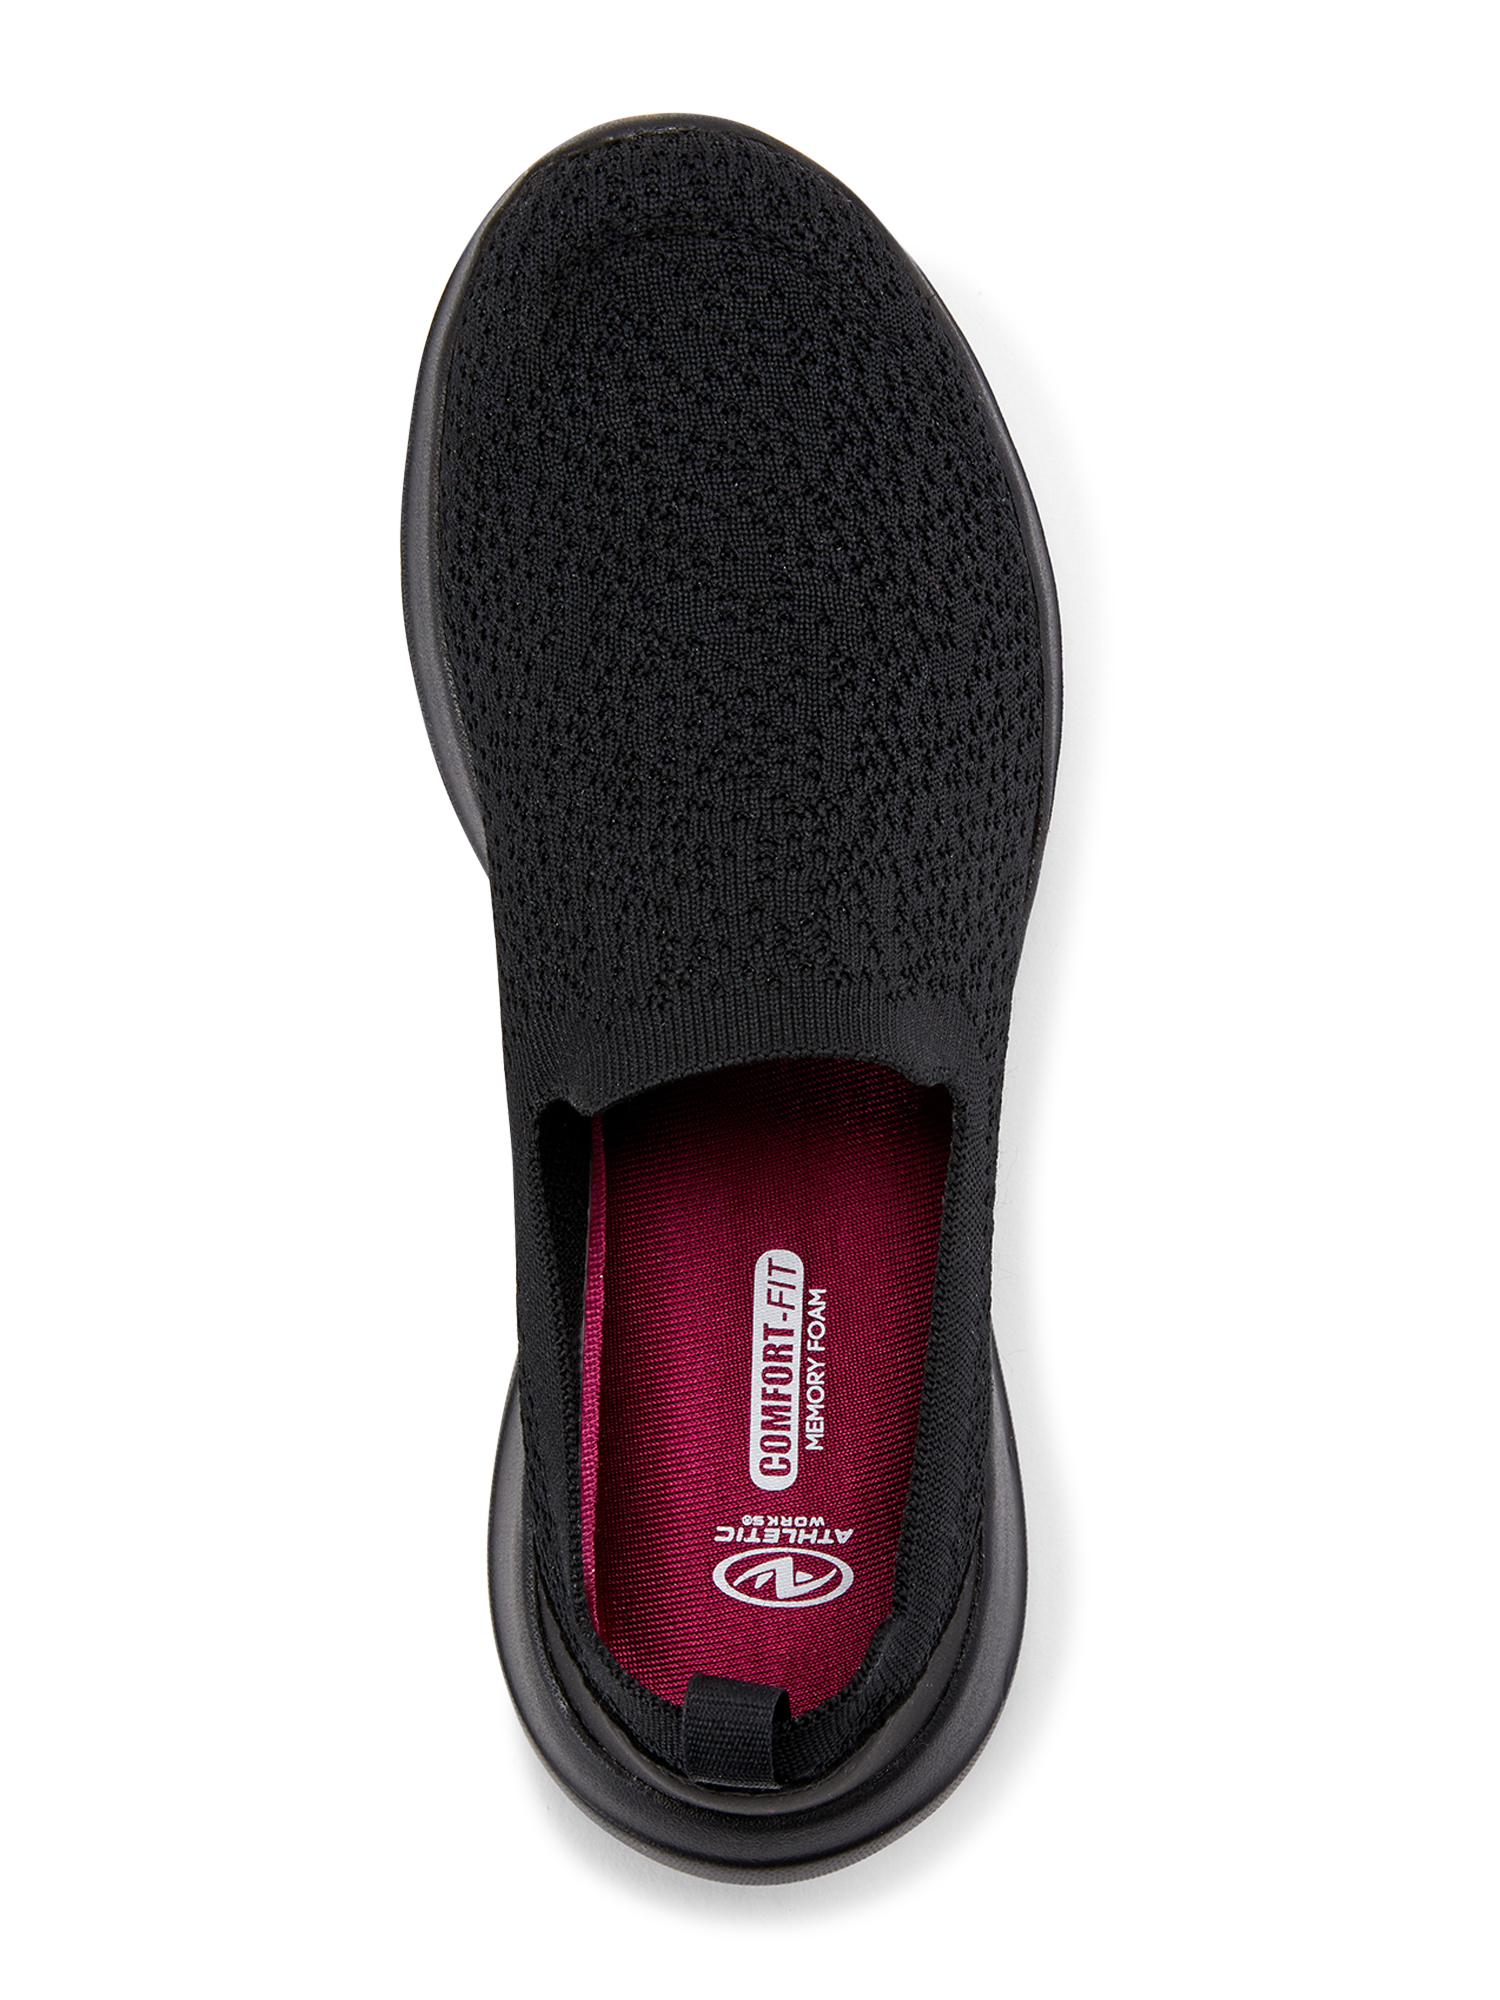 Athletic Works Women's Wide Width Slip On Shoes - image 3 of 6